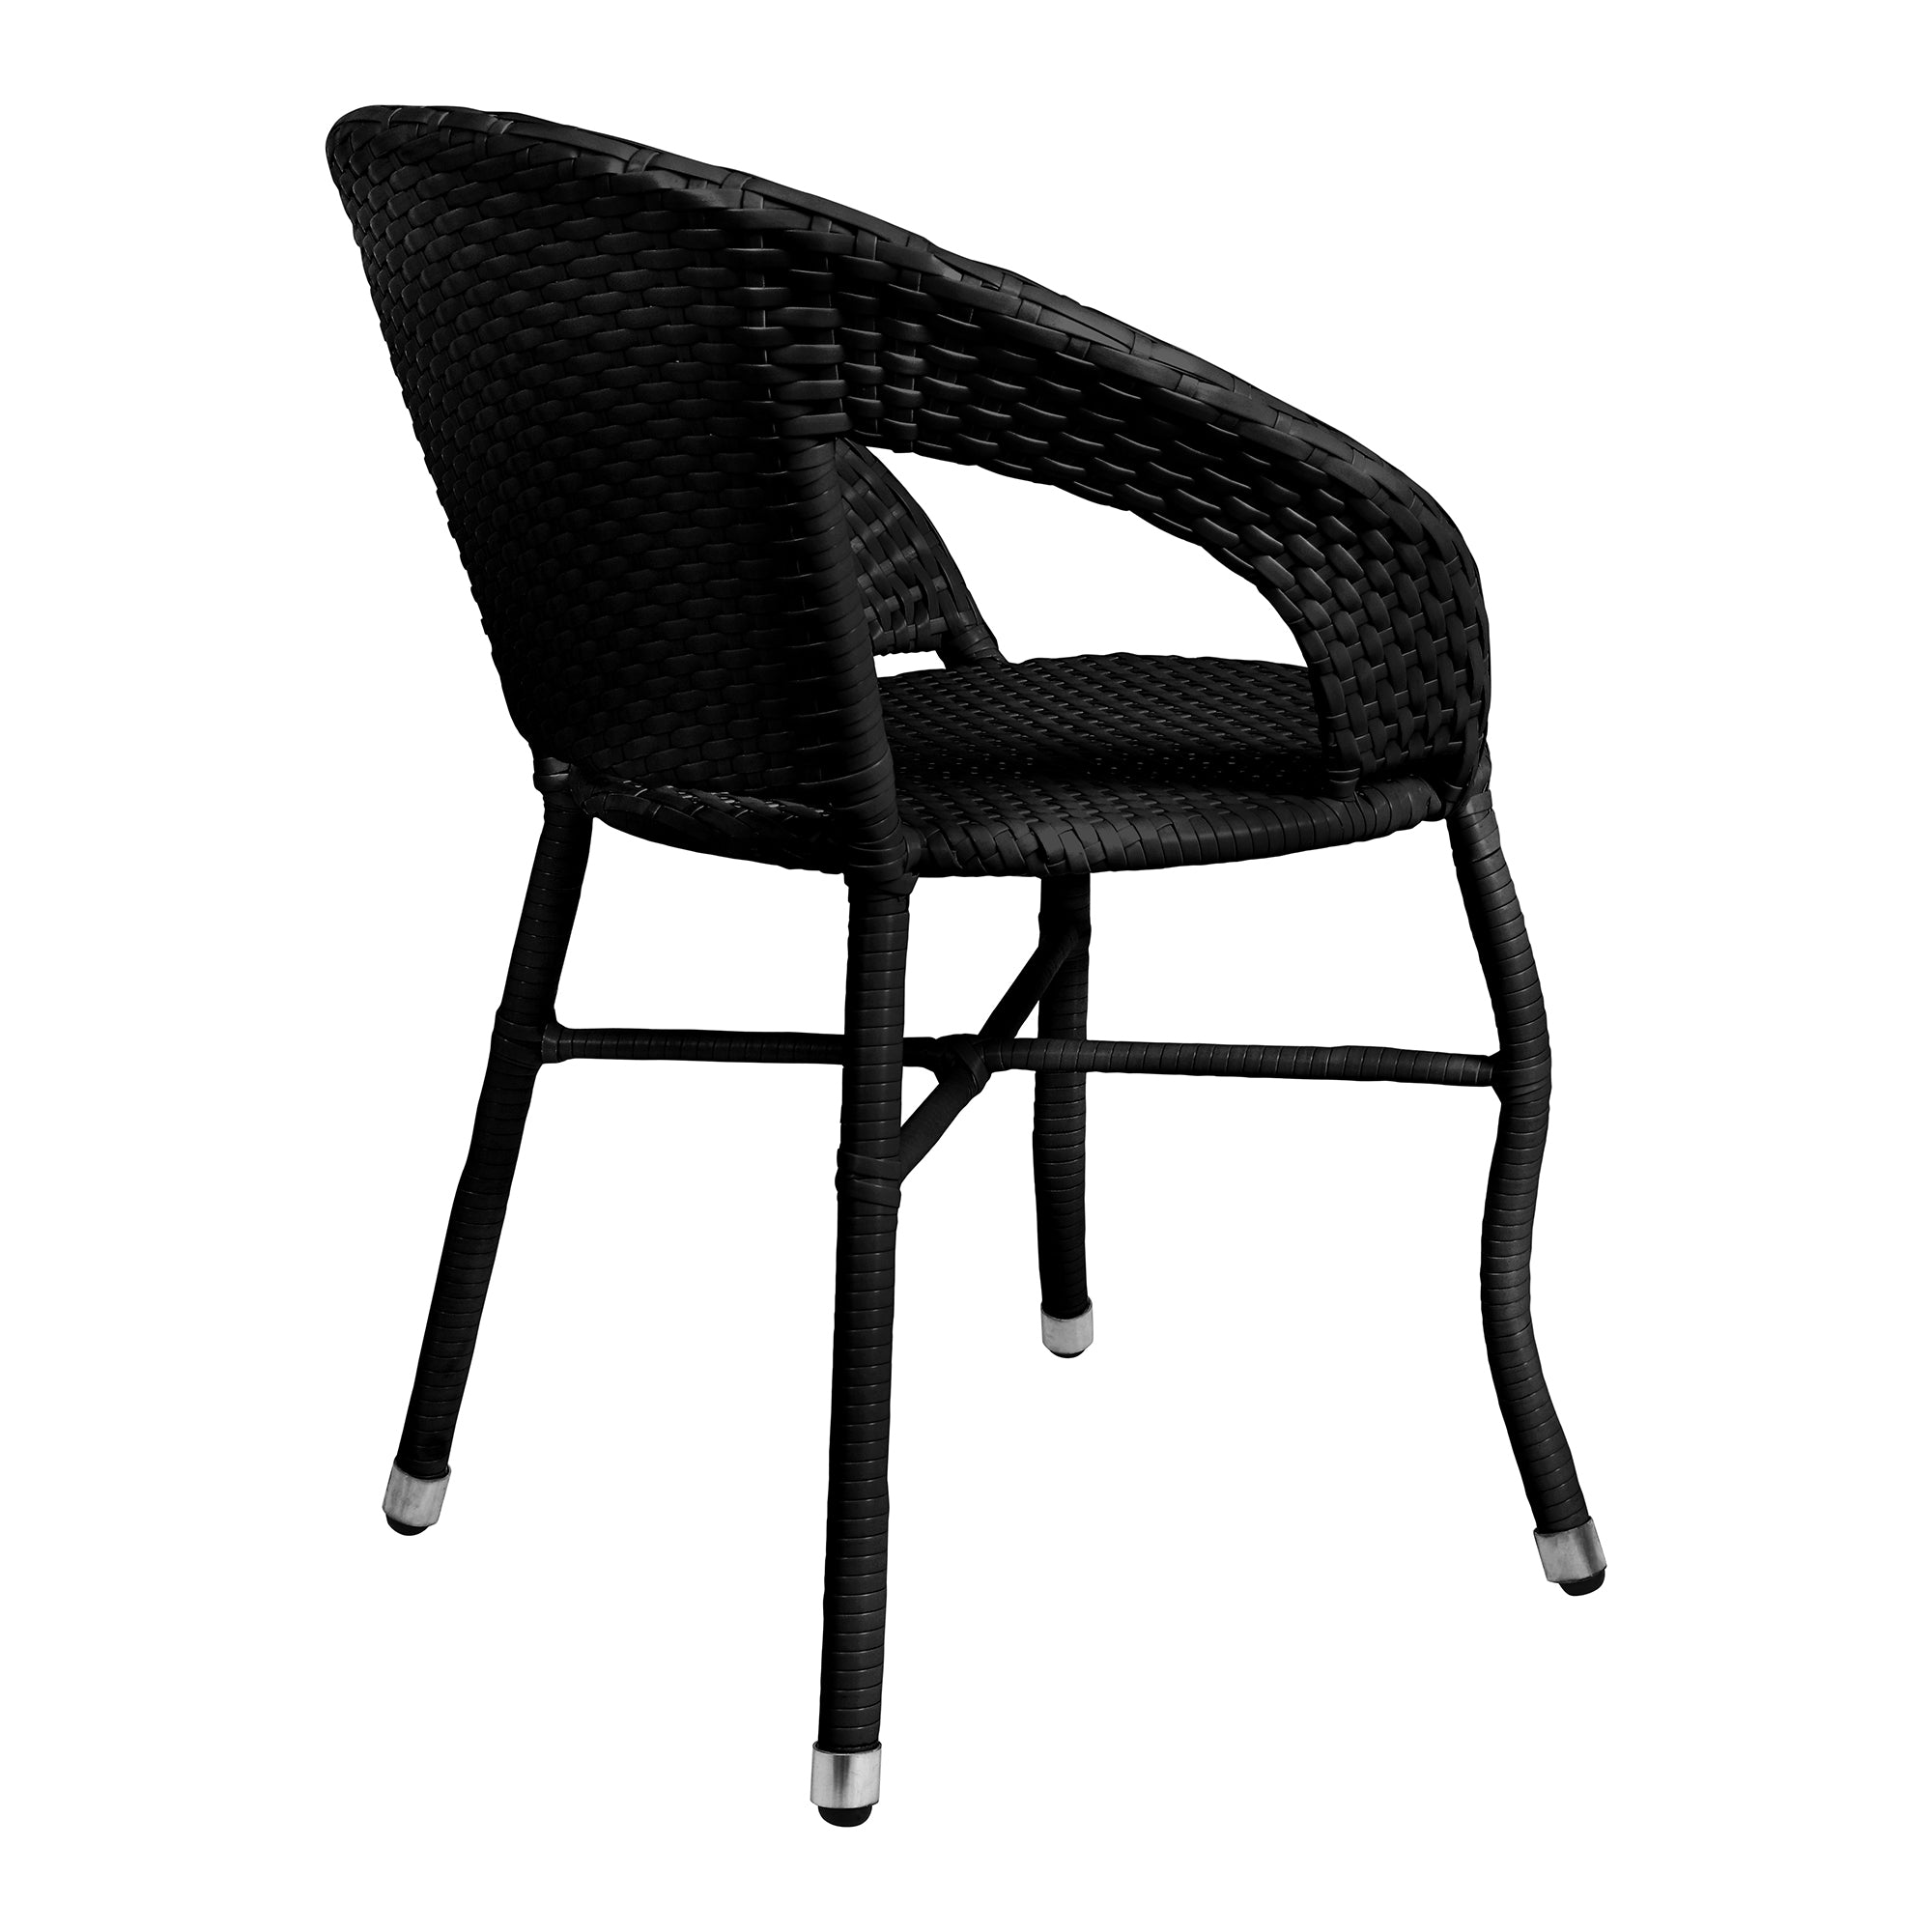 Grase Outdoor Patio Seating Set 4 Chairs and 1 Table Set (Black)